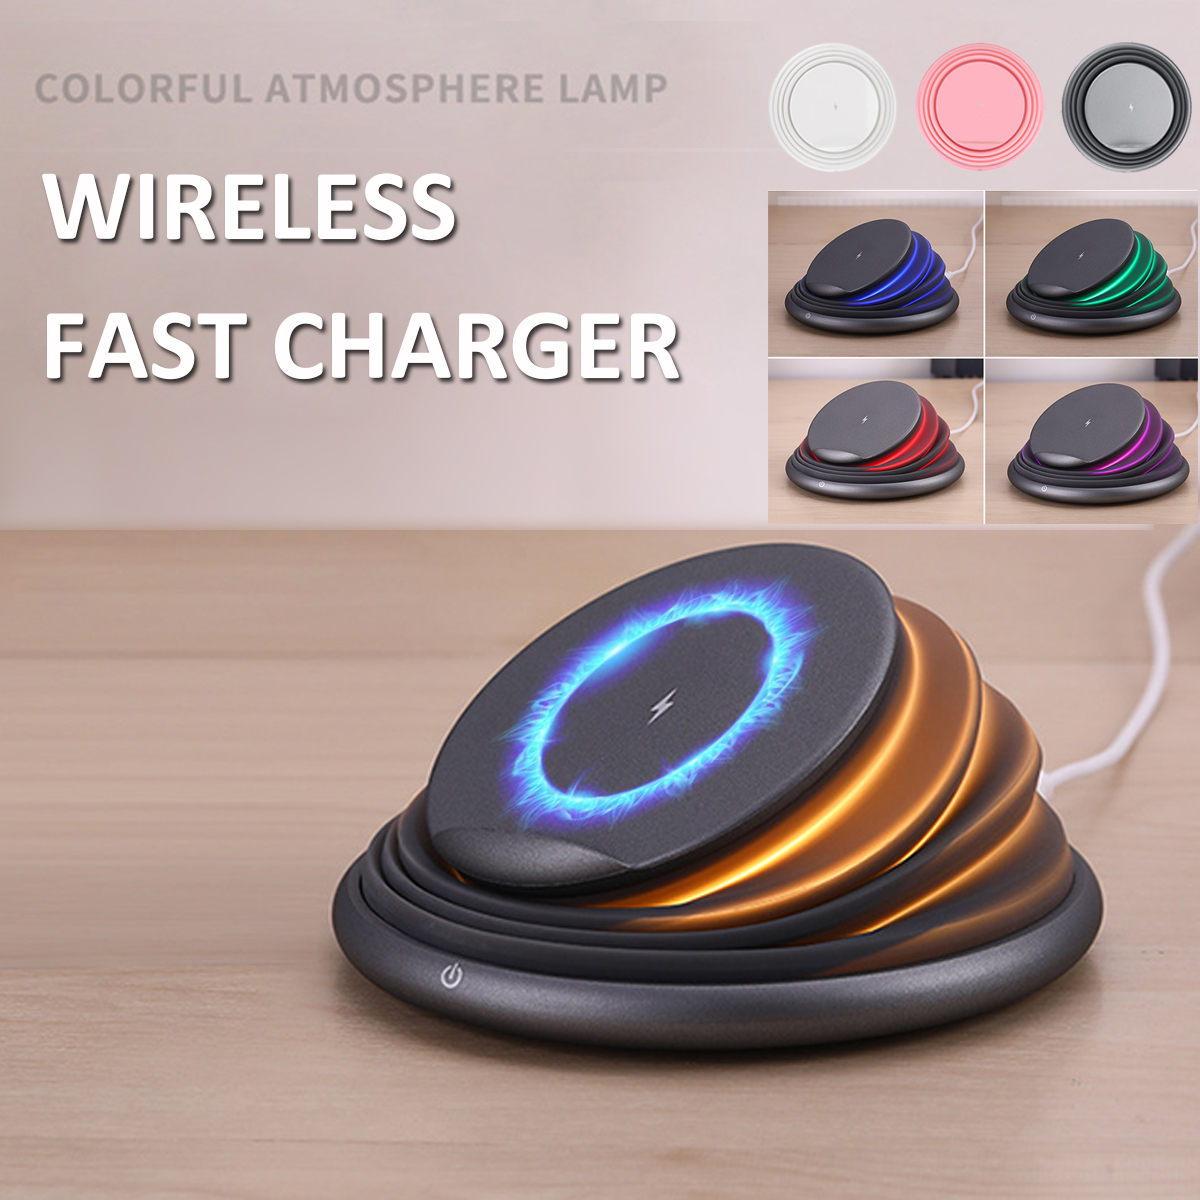 10W-9V-Wireless-Qi-Fast-Charger-Night-Light-Phone-Charging-Pad-For-Samsung-S8-S9-Note-8-1356503